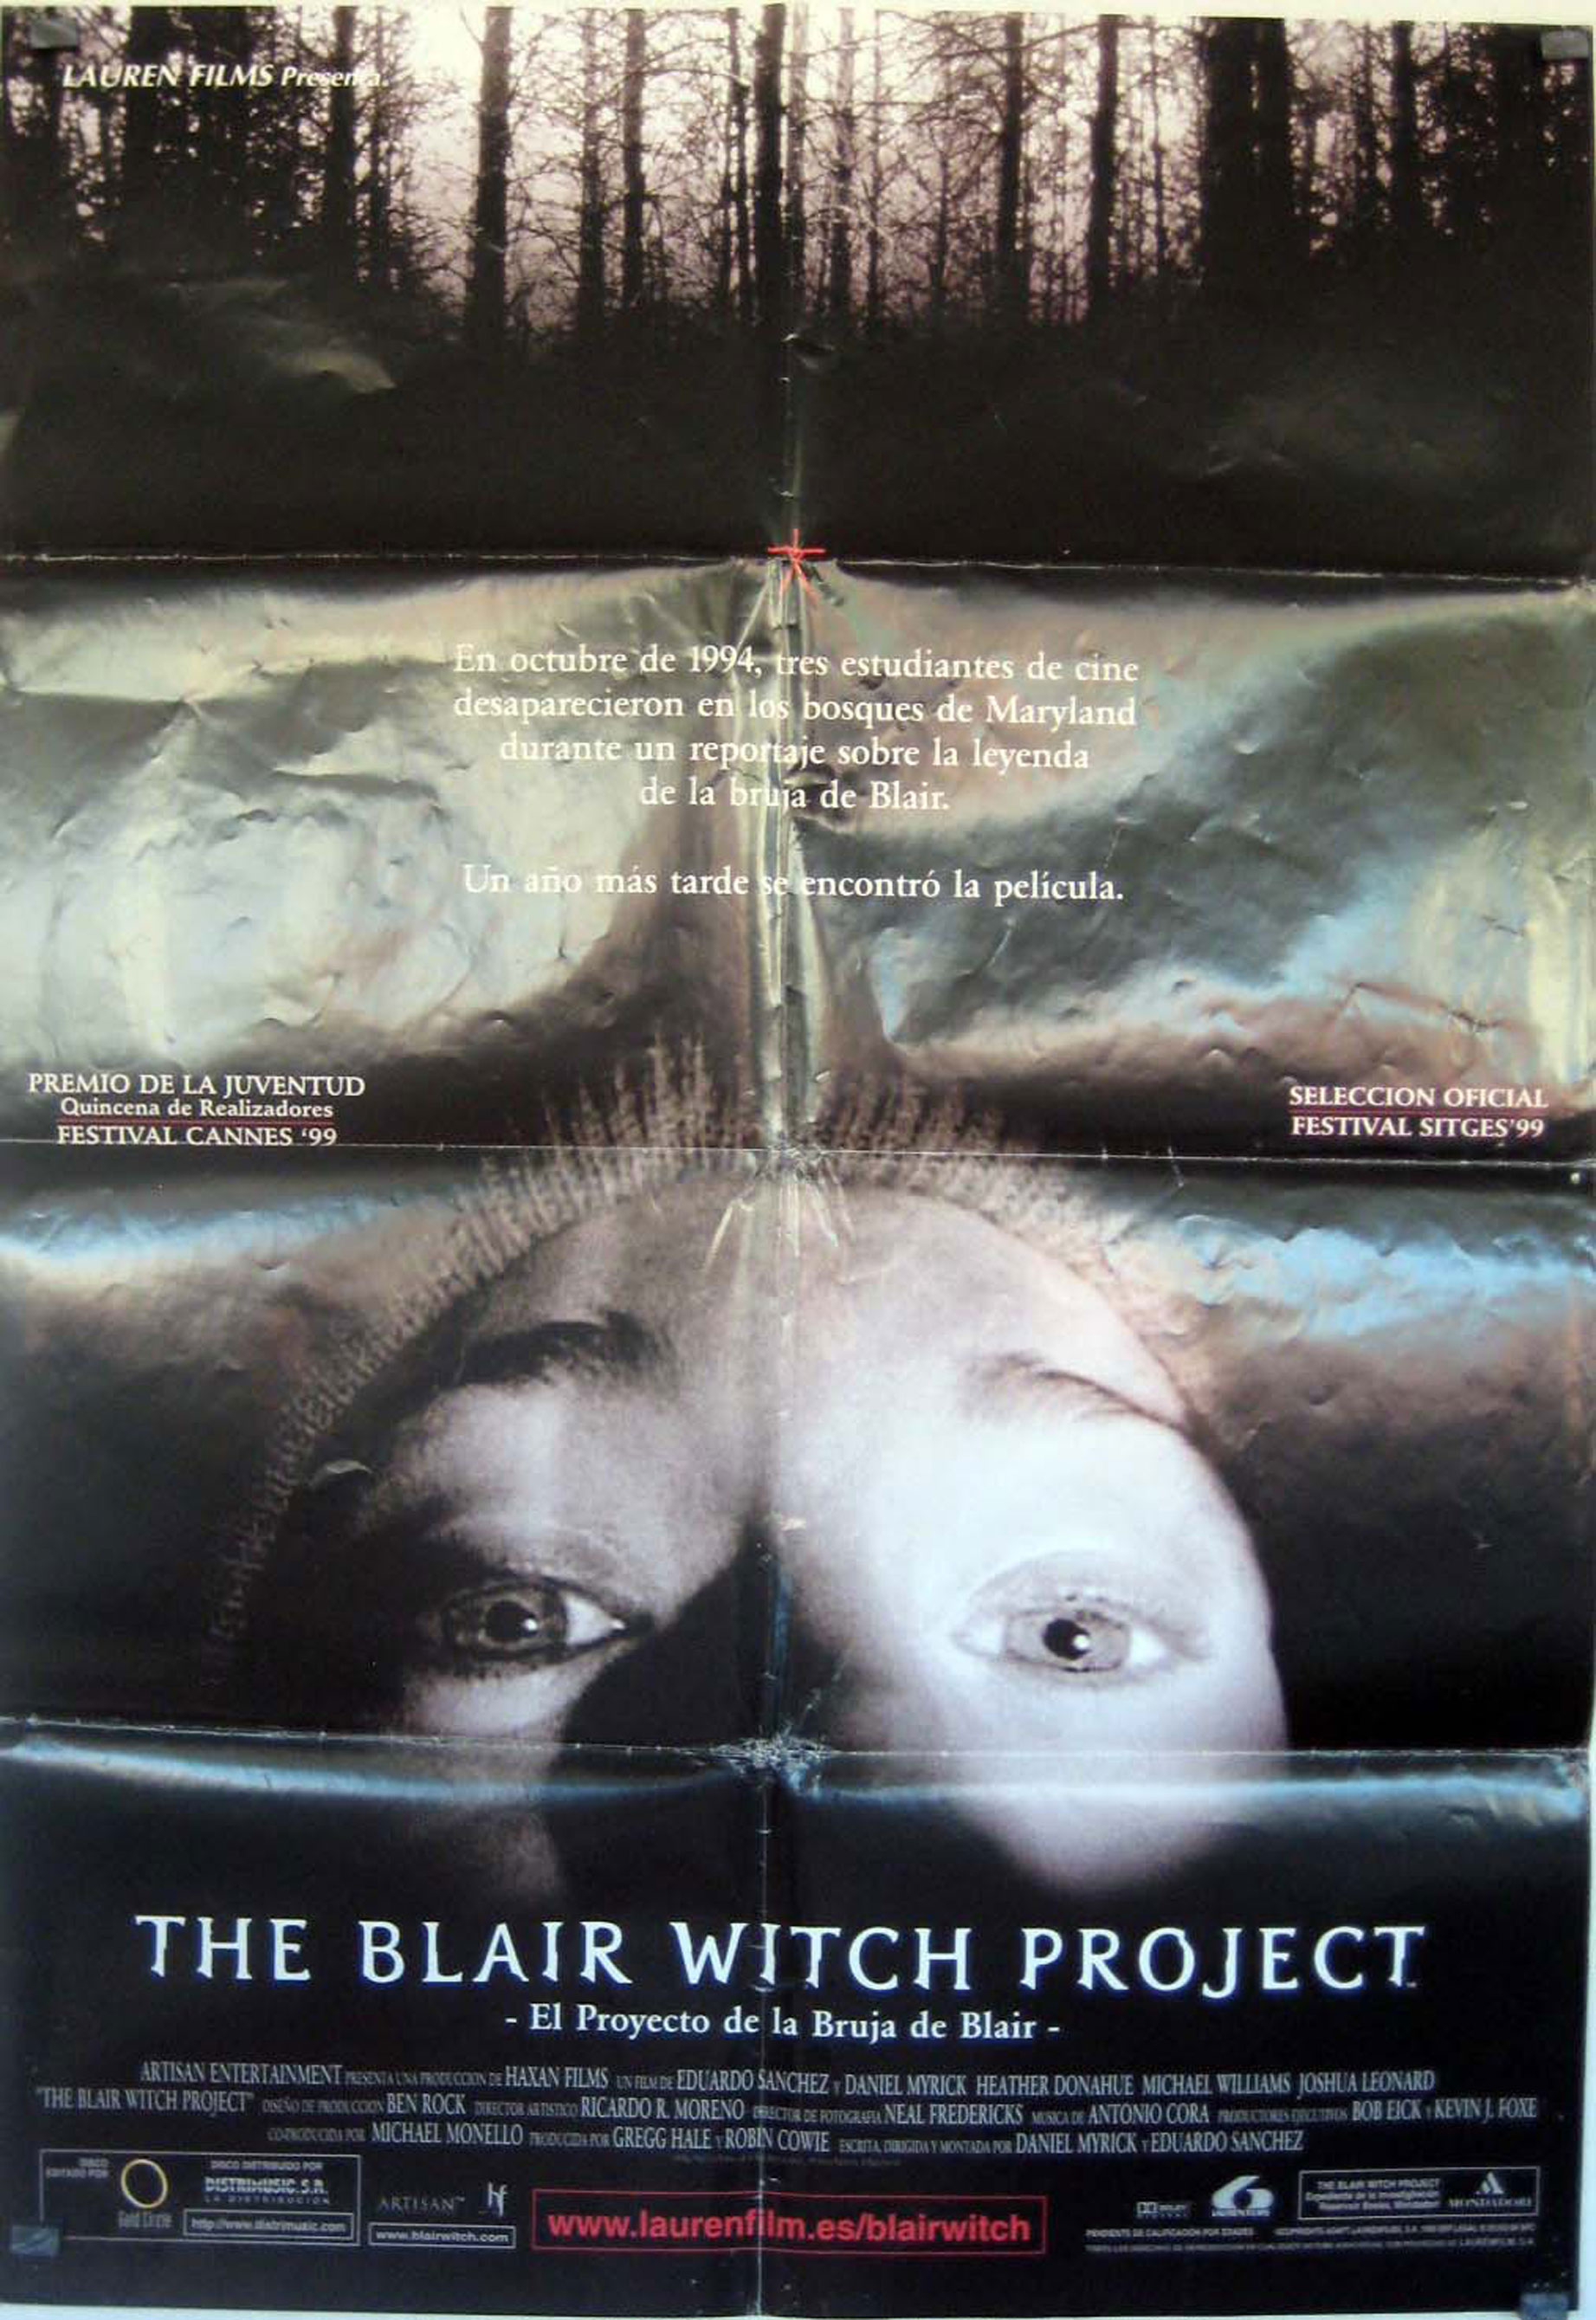 The Blair Witch Project Movie Poster The Blair Witch Project Movie Poster 3978